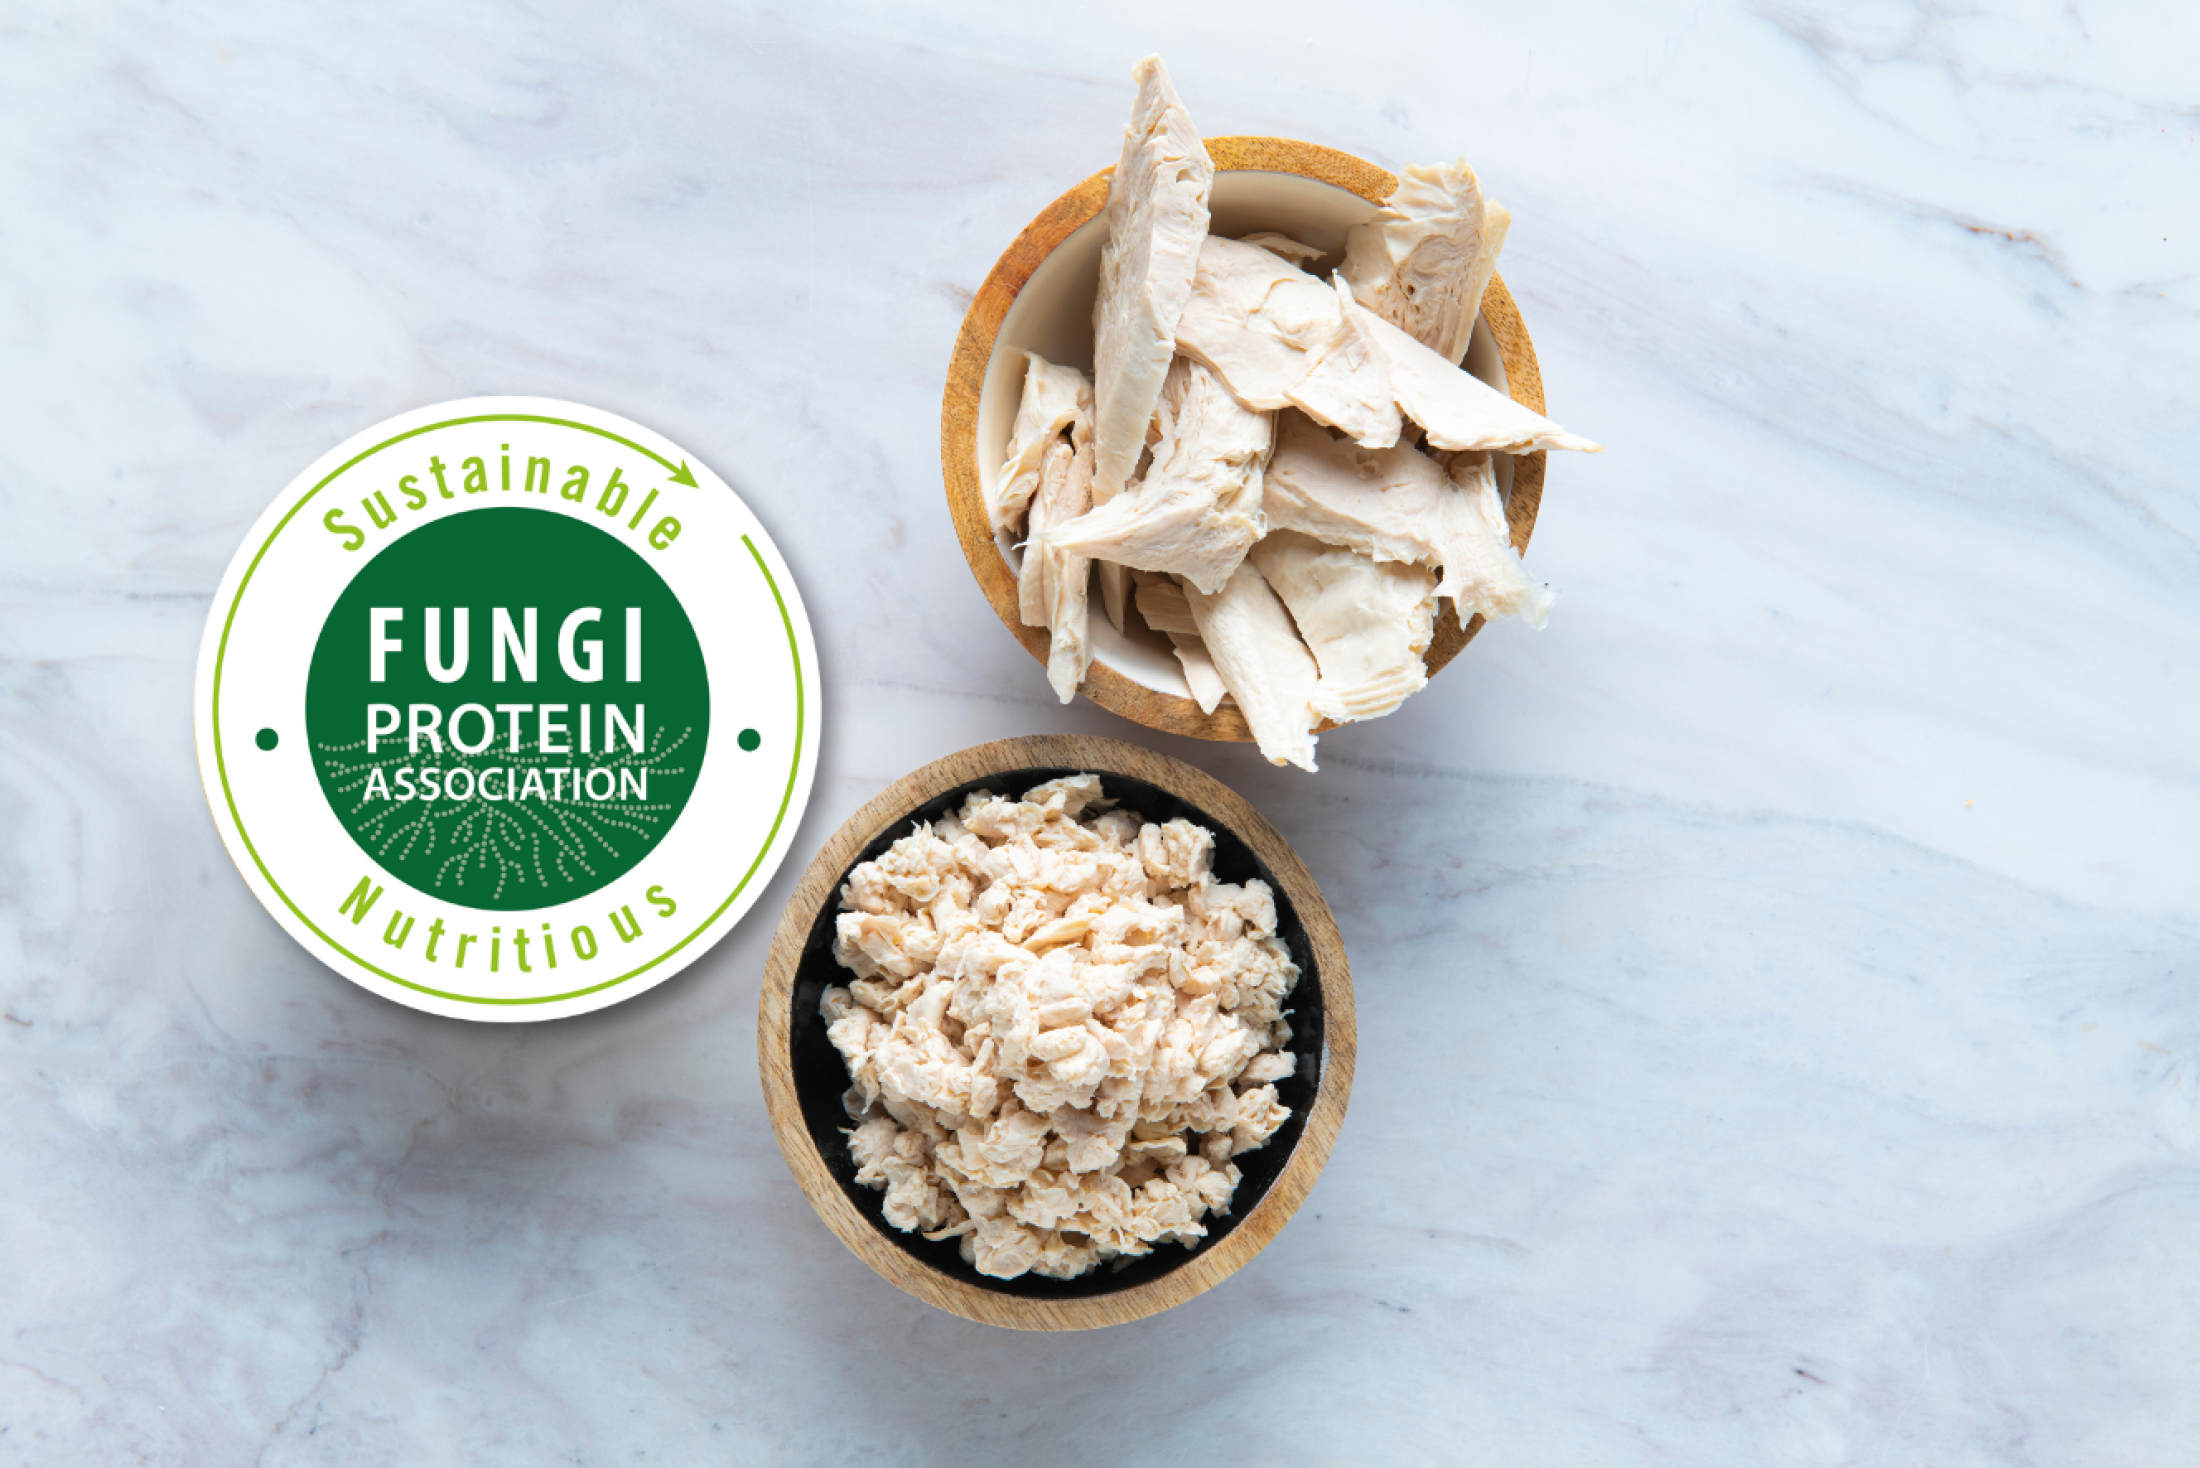 Naplasol is proud member of the Fungi Protein Association